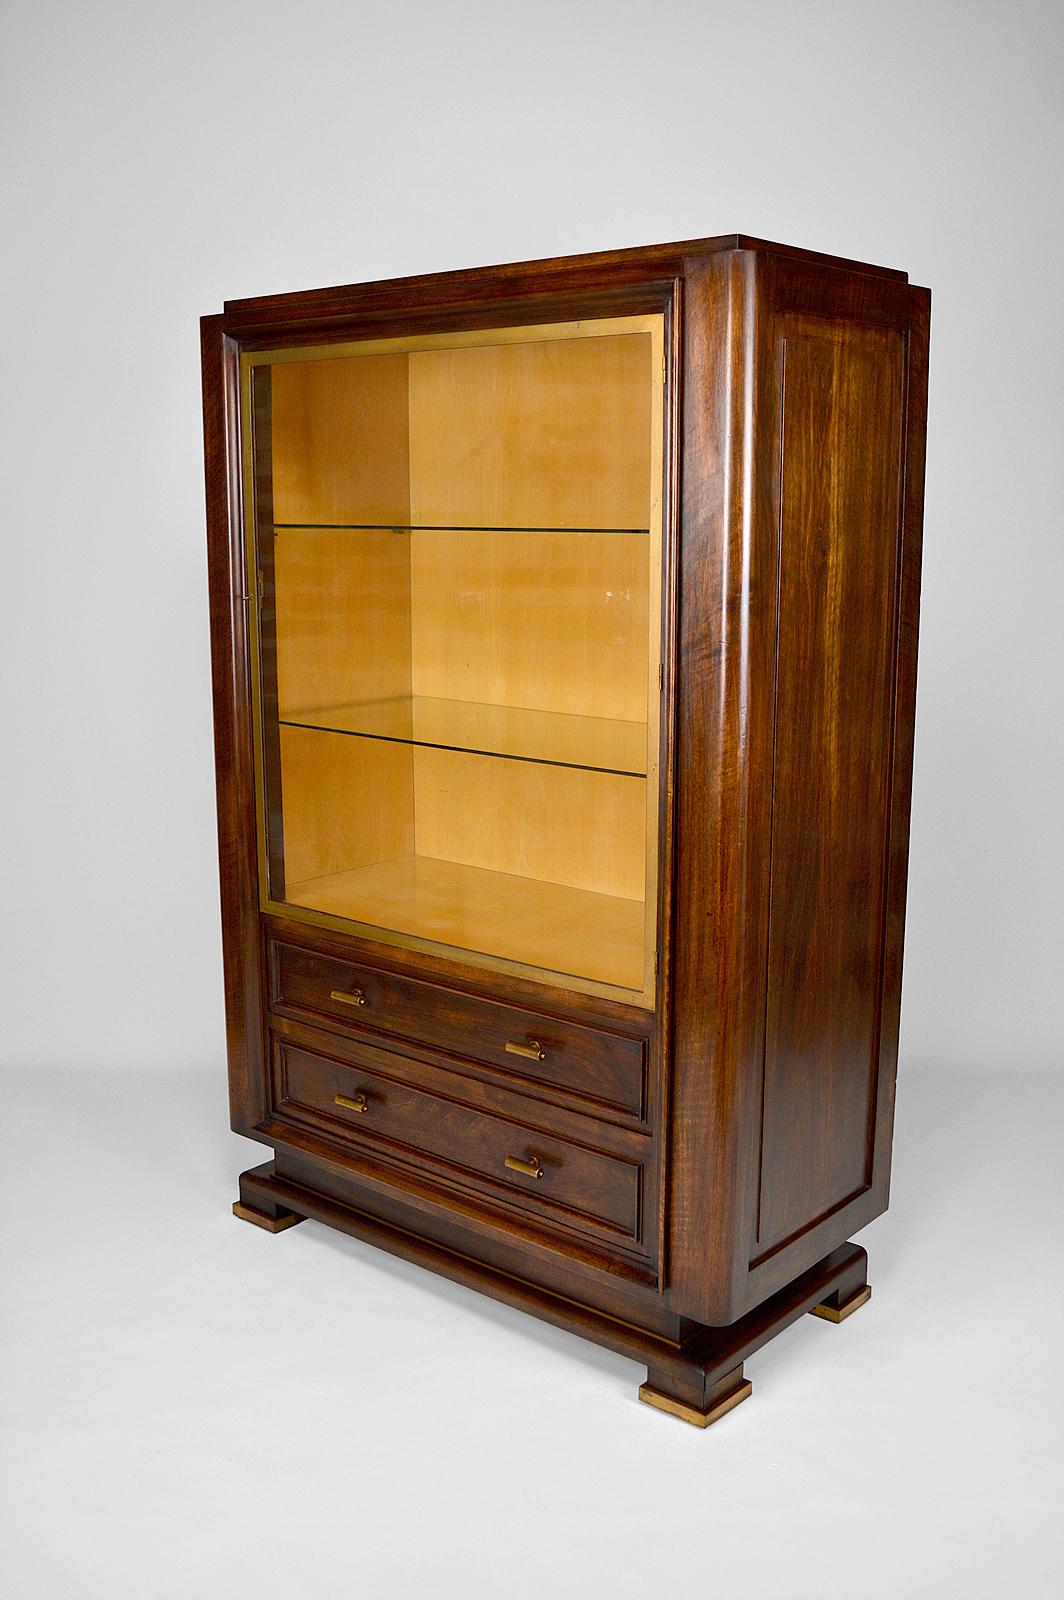 Elegant display cabinet / showcase / vitrine / bookcase in solid and veneered walnut, nicely enhanced with bronze / brass fillets on his door.
Composed of 2 drawers and a glazed cupboard with 2 glass shelves.

Art Deco Modernism / Mid-Century